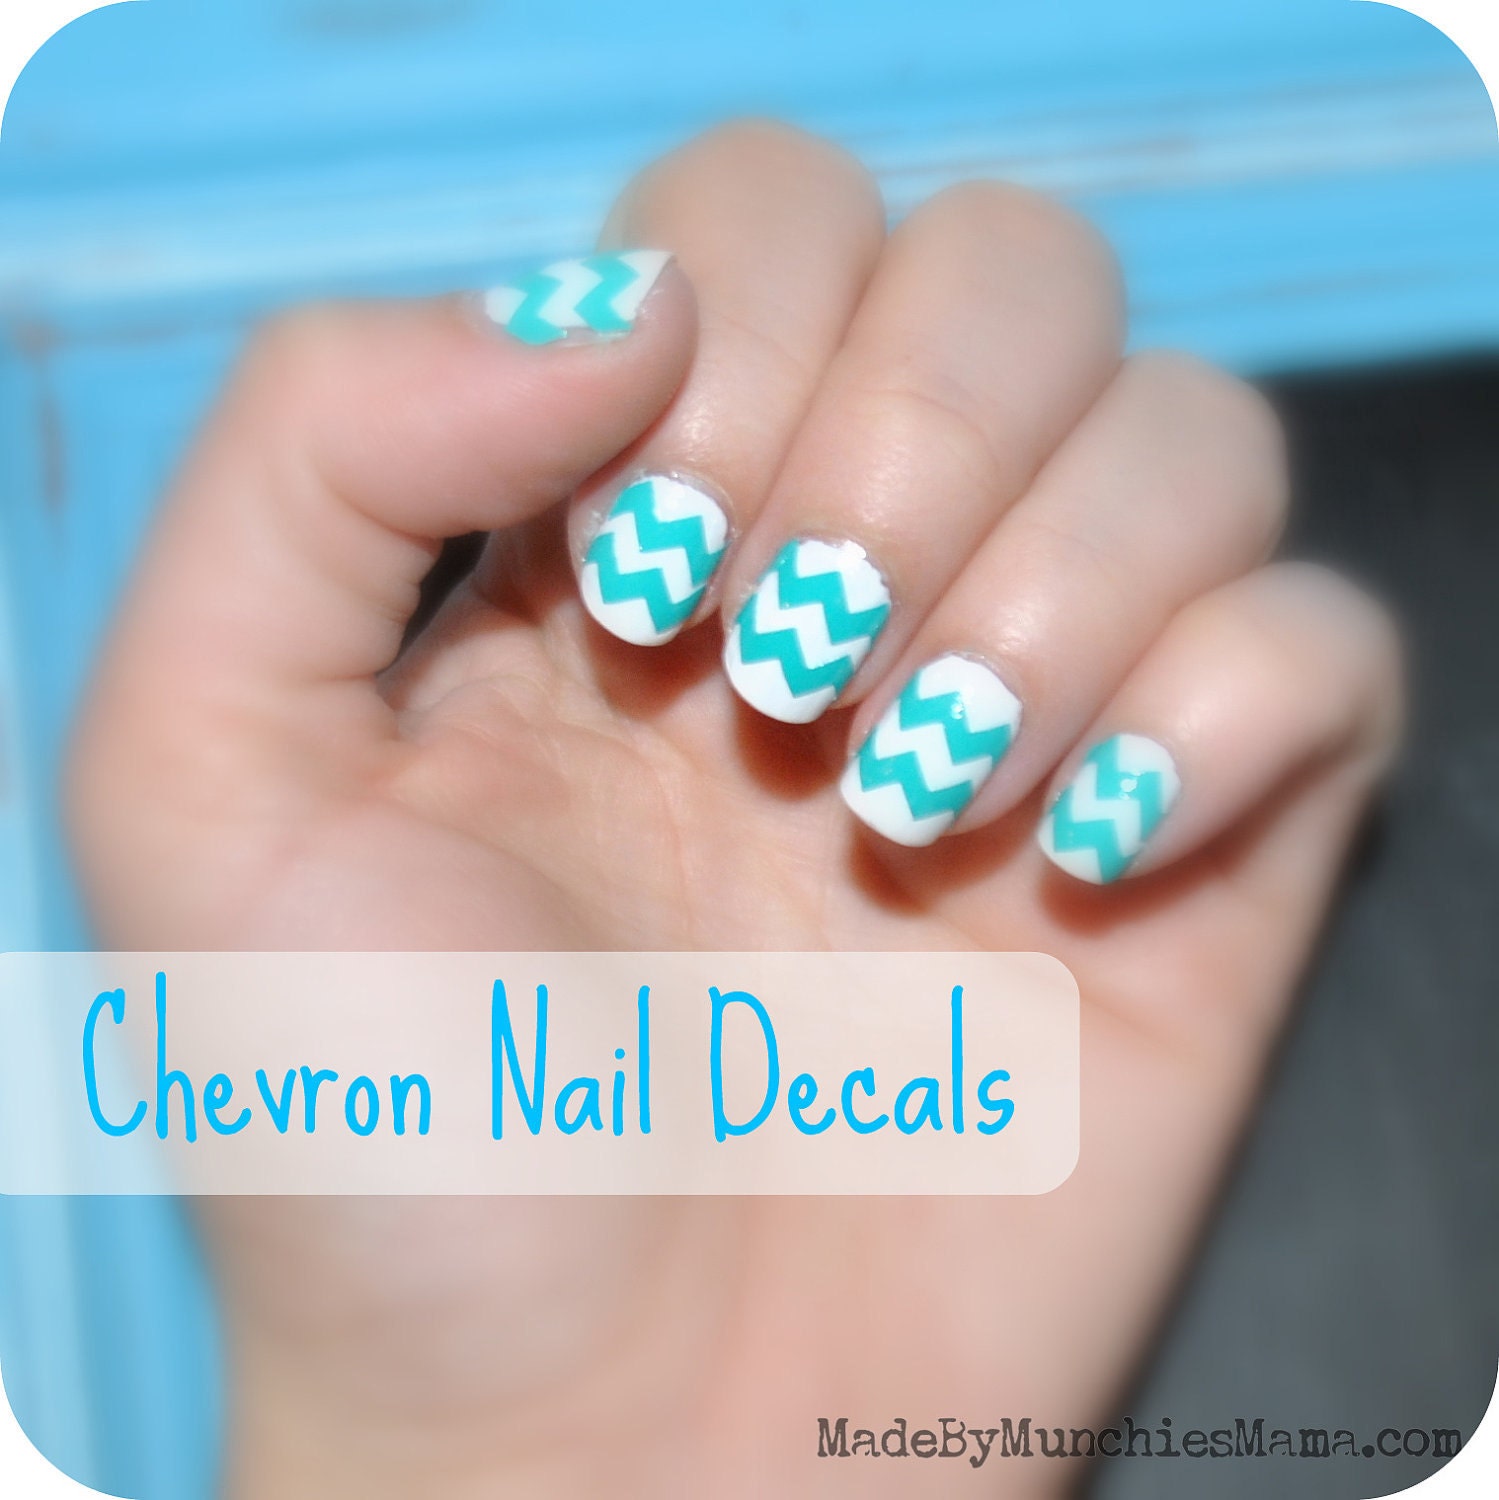 1 Sheet of 44 Chevron Nail Decals (You Pick the Color) - MadeByMunchiesMama